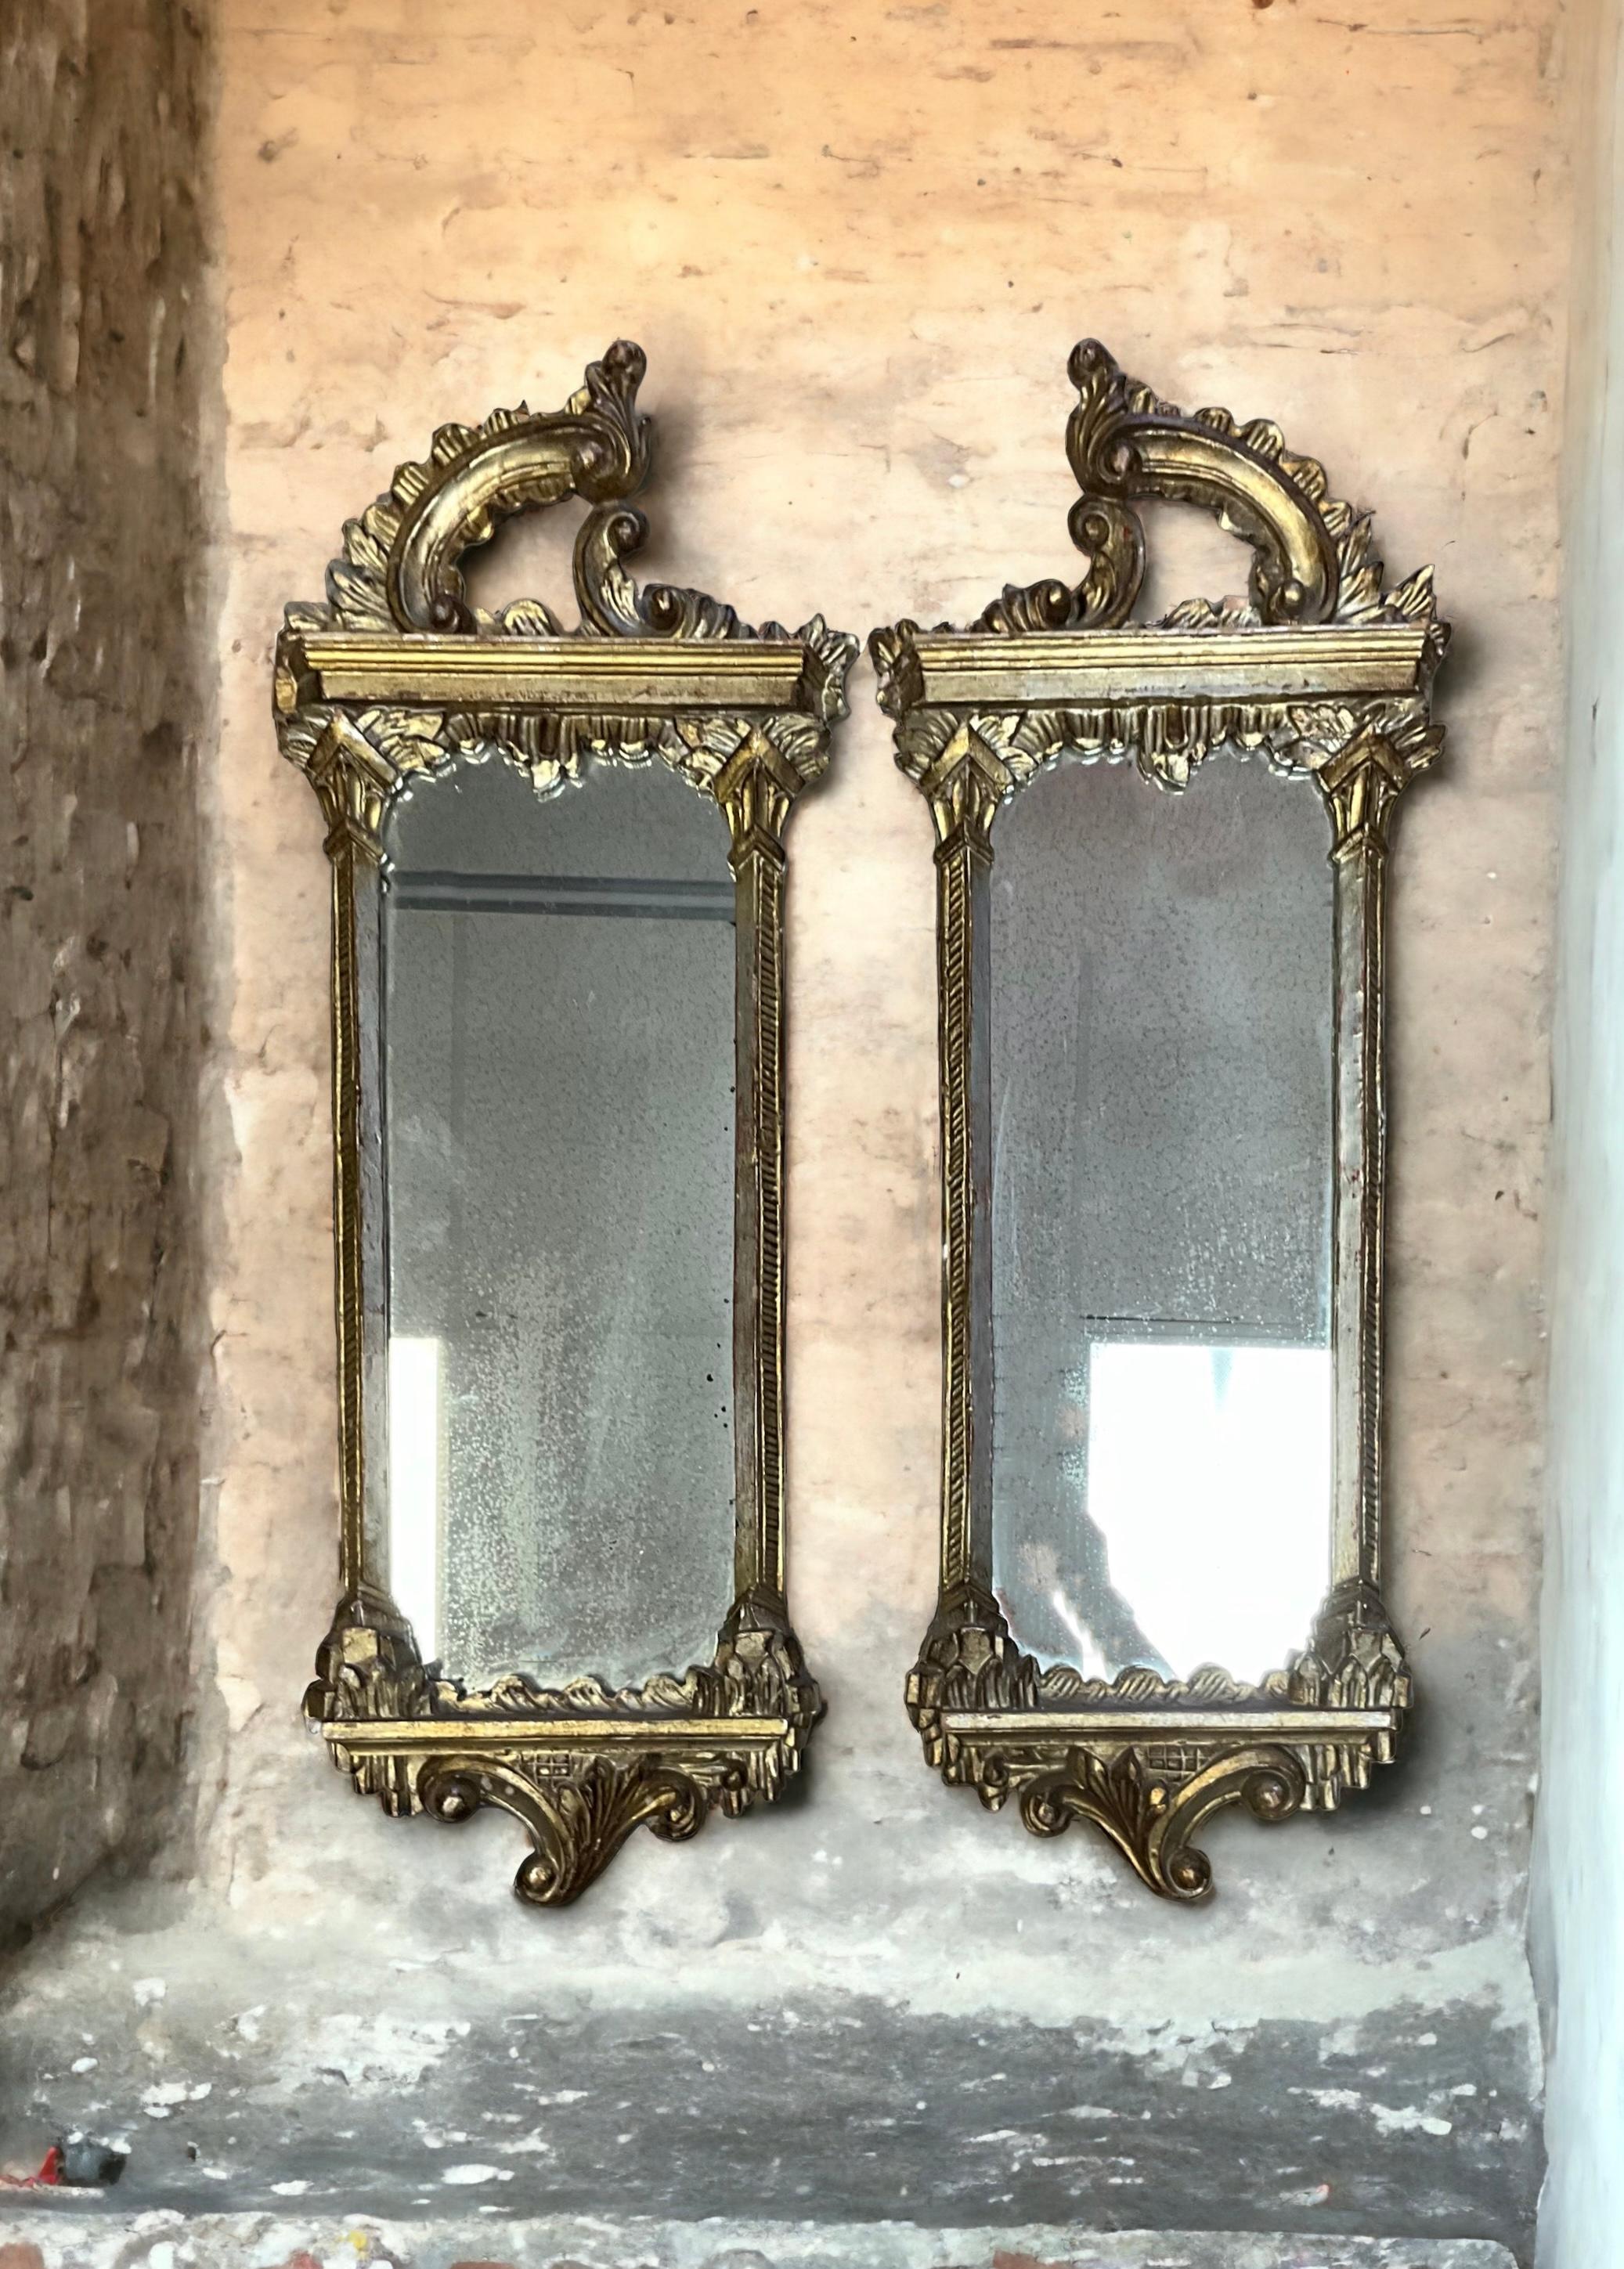 These are beautiful! It is a large scale 1930s Italian Chinese Chippendale style silver giltwood mirrors. They are in very good condition and are unmarked. The glass shows some age wear. Even though the mirrors are predominantly silver, they do have